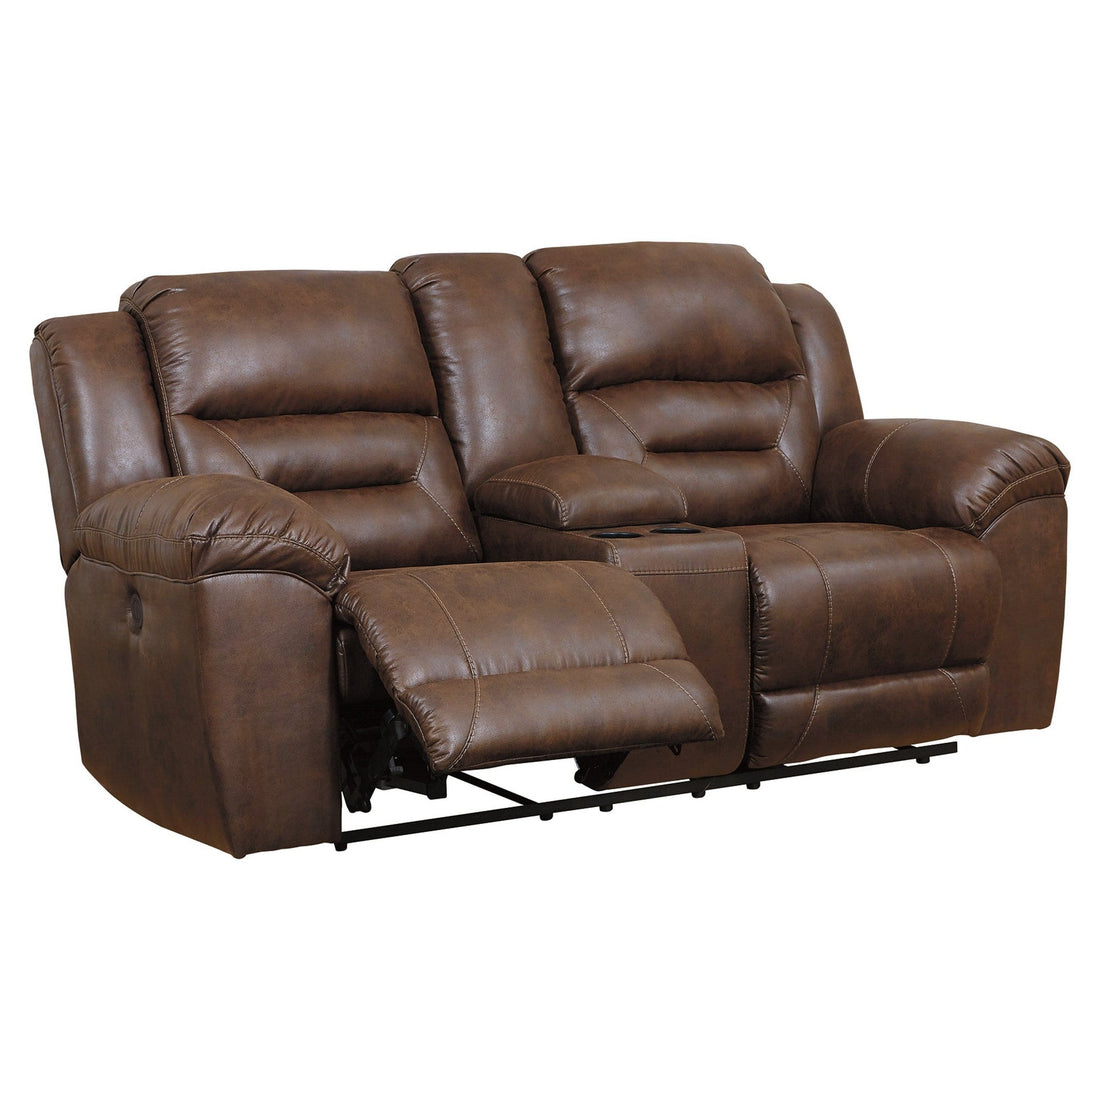 Stoneland Power Reclining Loveseat with Console Ash-3990496